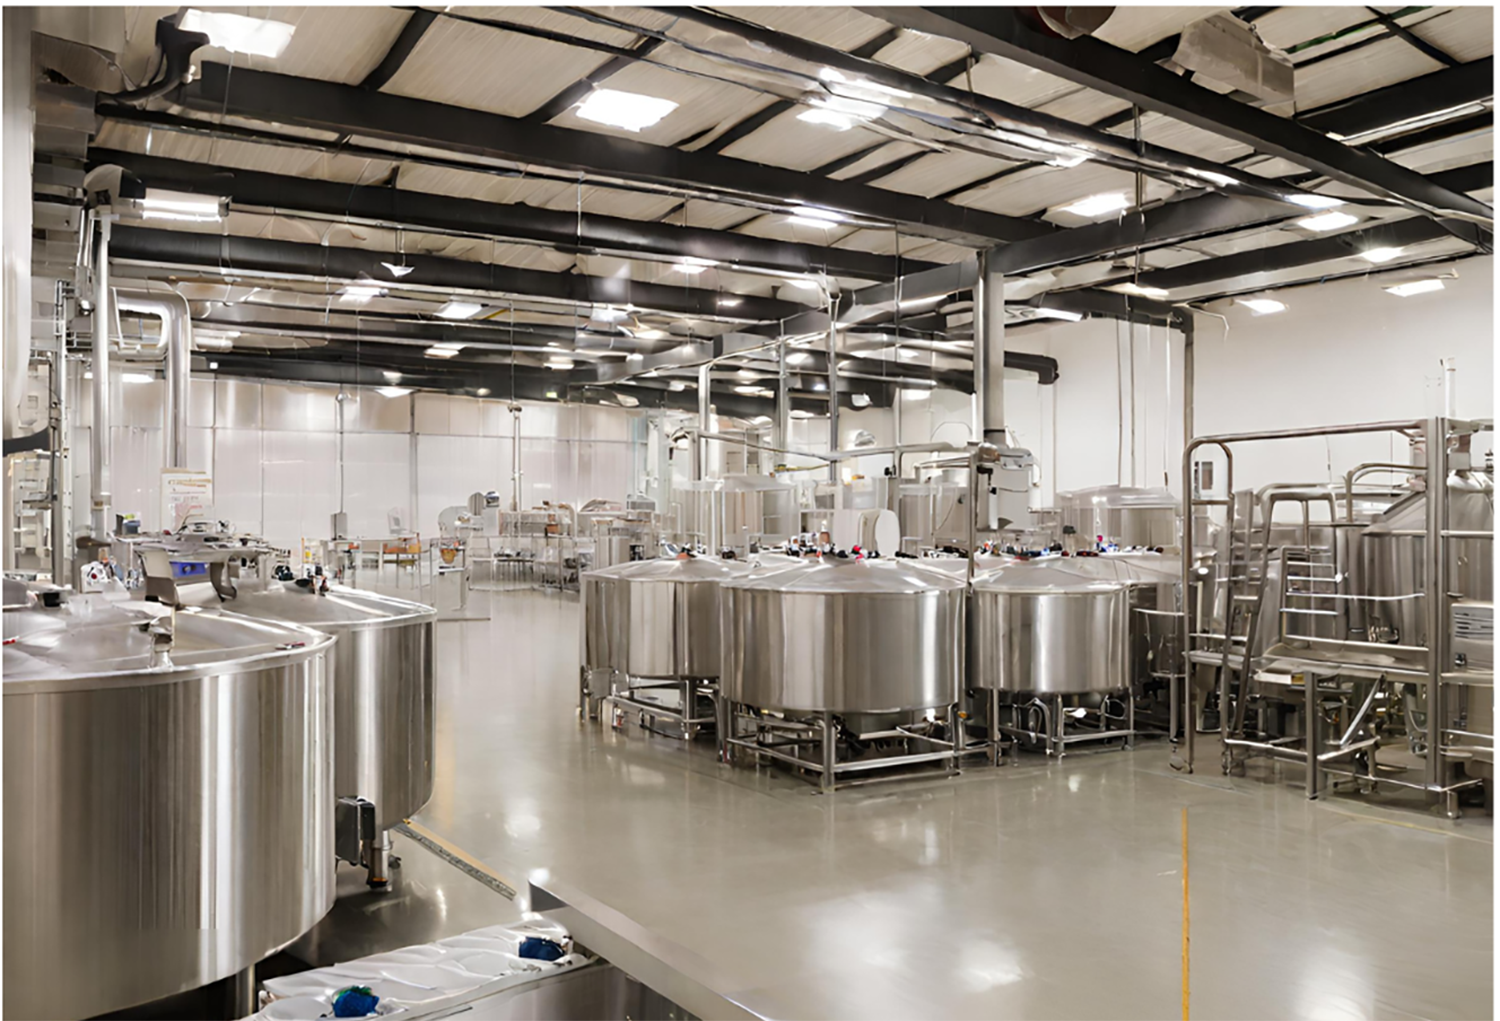 Advanced Wastewater Treatment Technologies in the Food & Beverage Industry